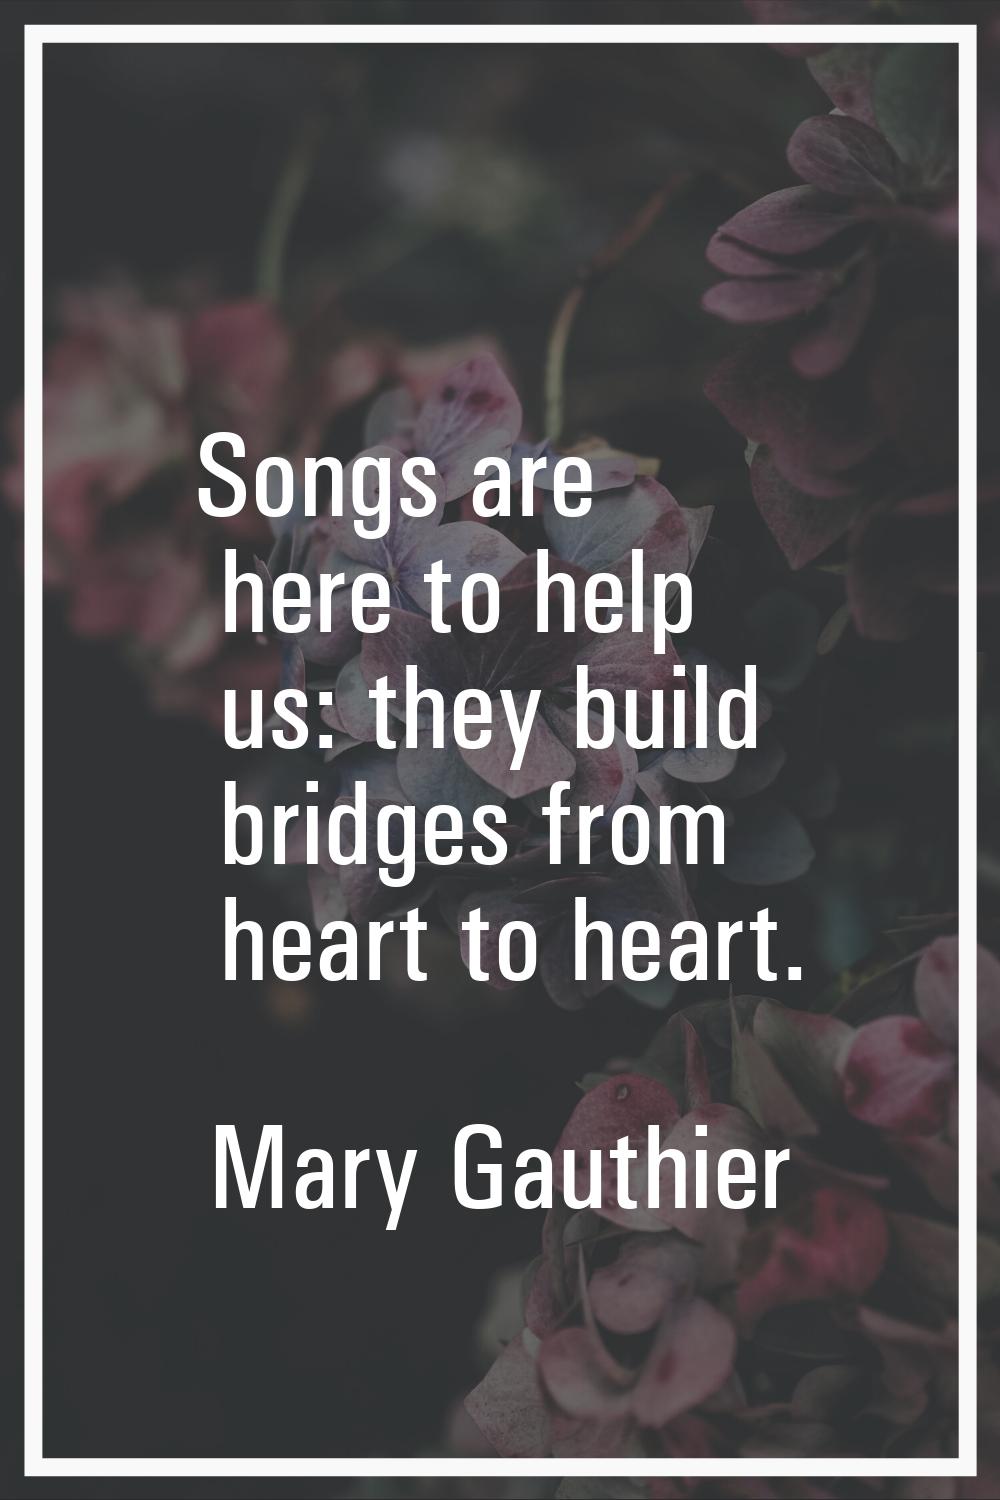 Songs are here to help us: they build bridges from heart to heart.